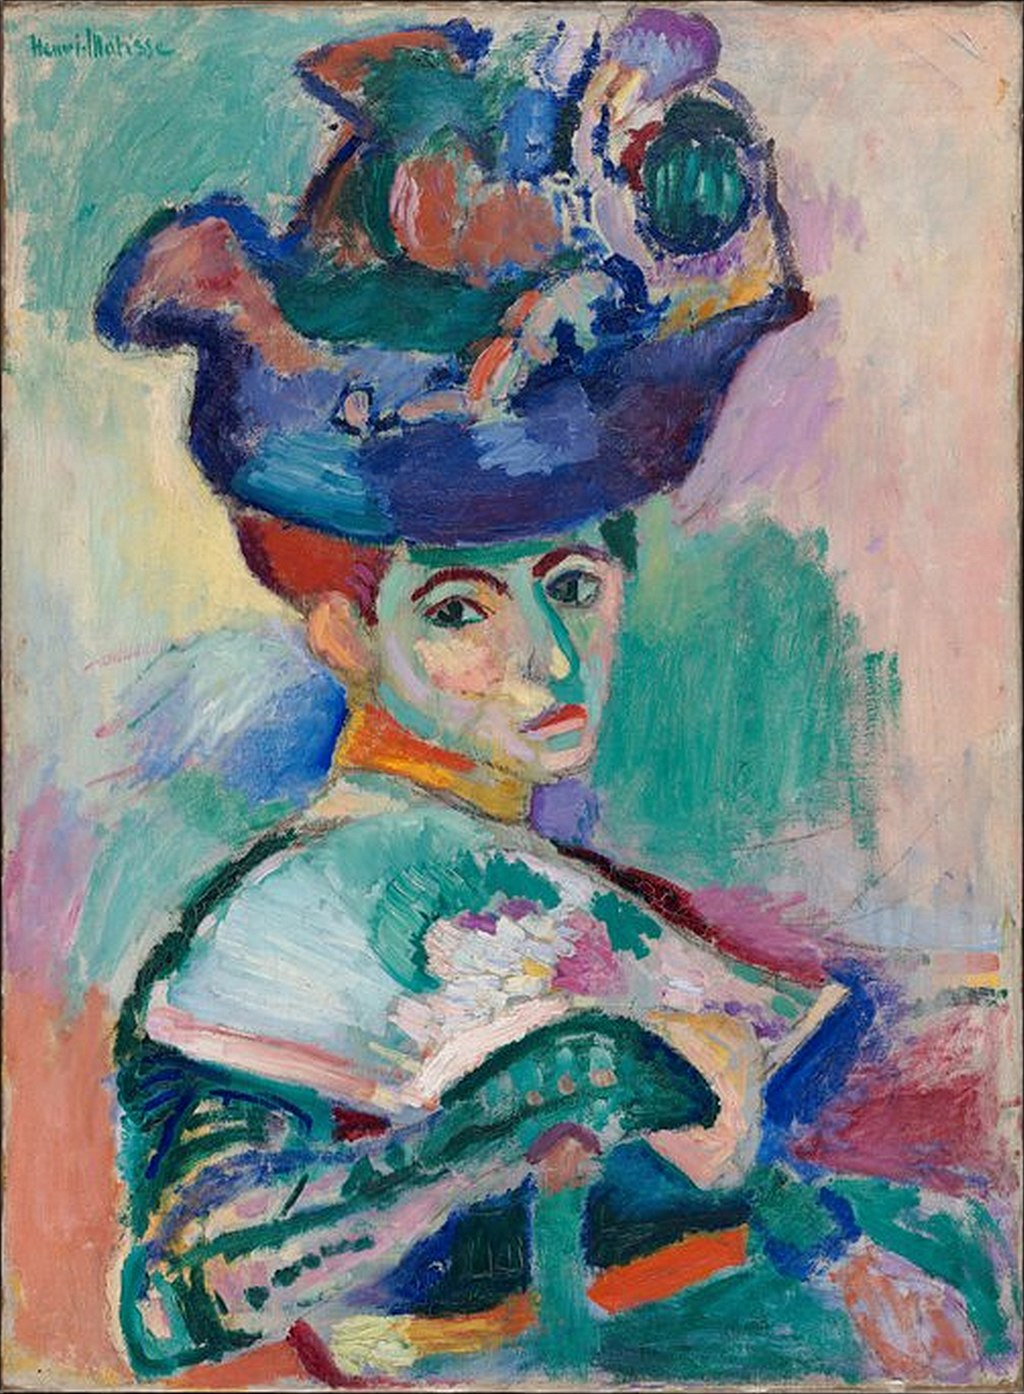 Woman with a Hat Painting by Henri Matisse Oil on Canvas Reproduction by Blue Surf Art